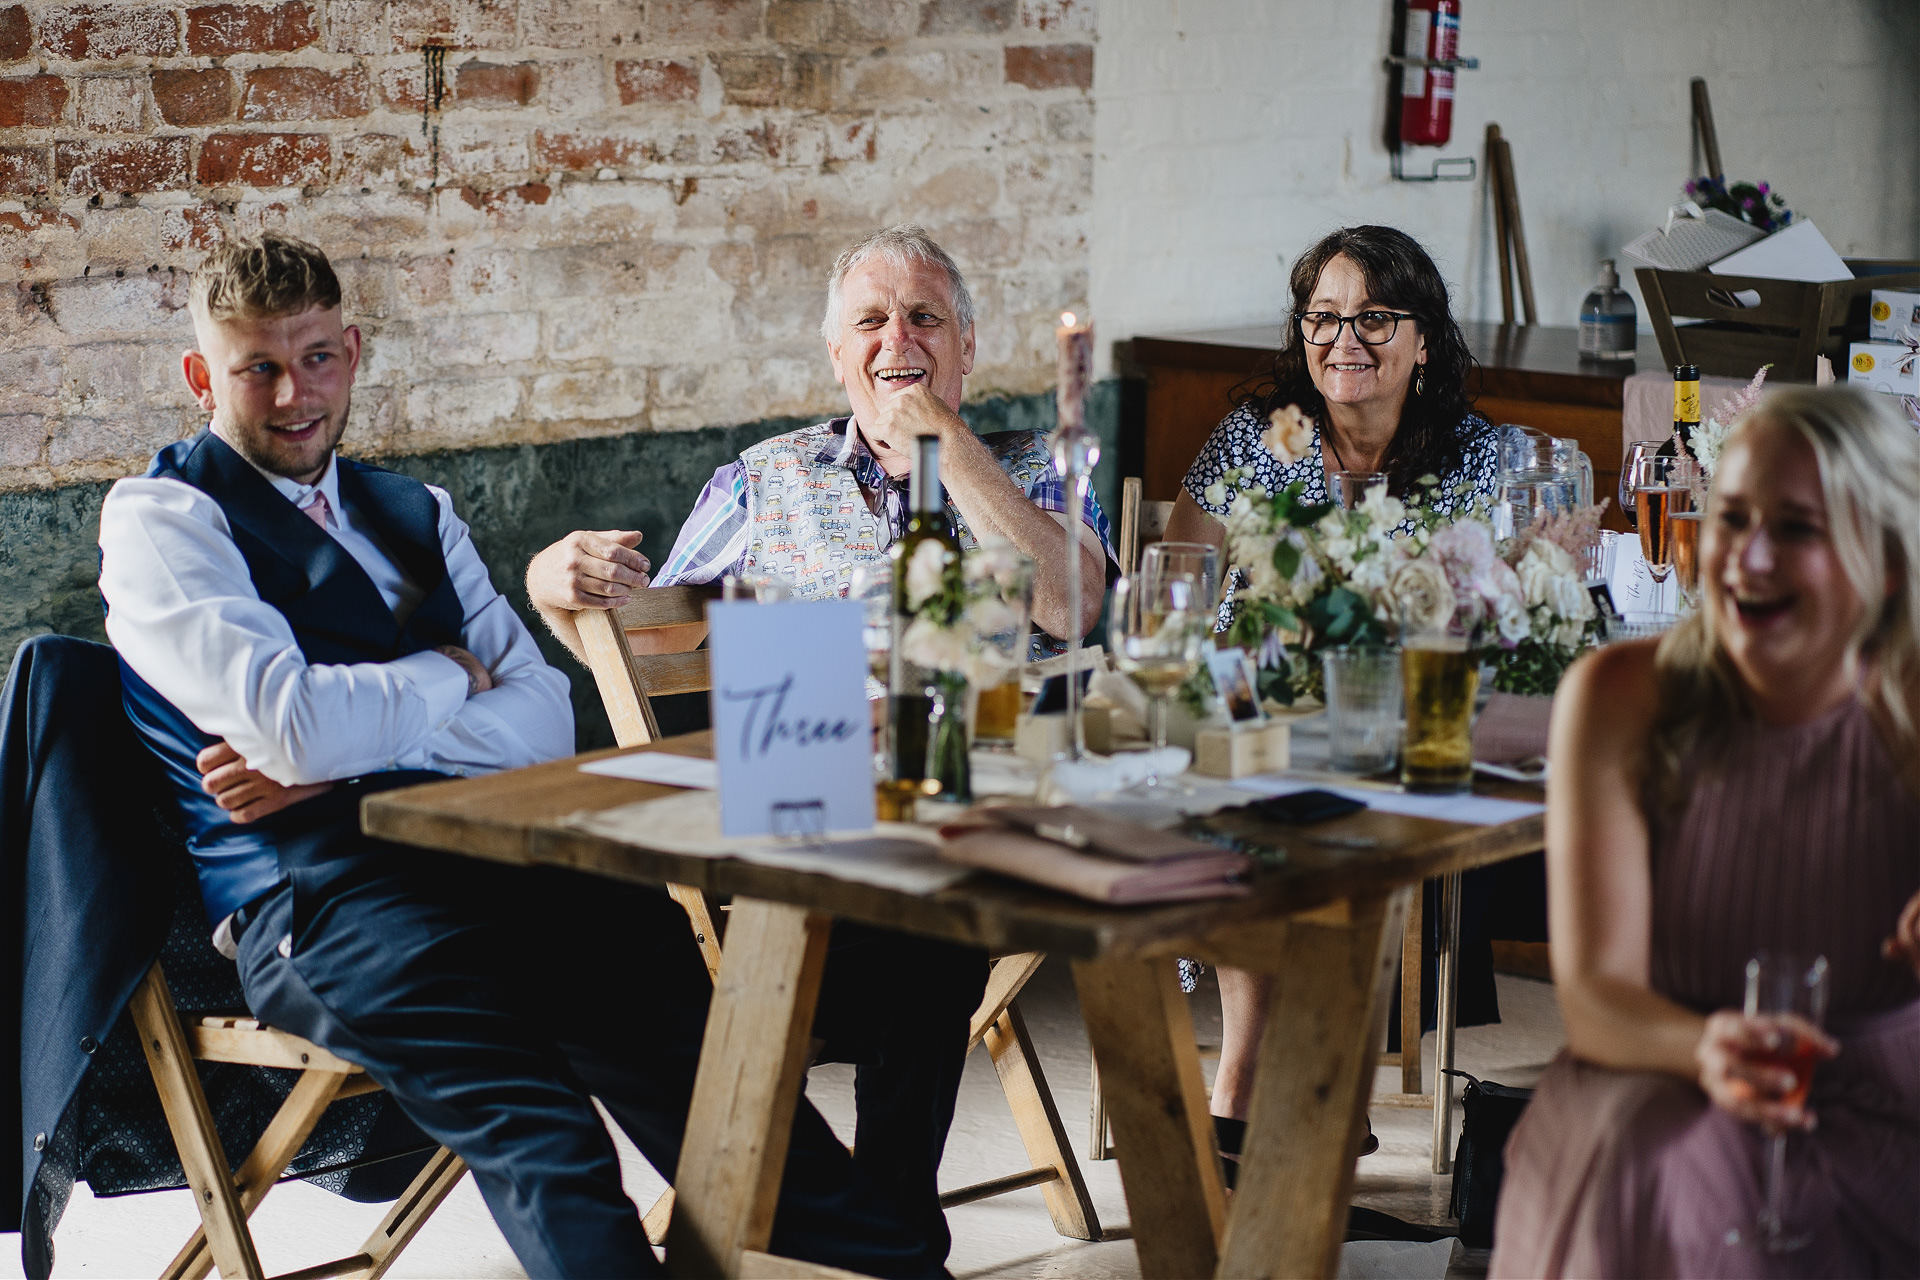 Wedding guests laughing during speeches in a rustic barn